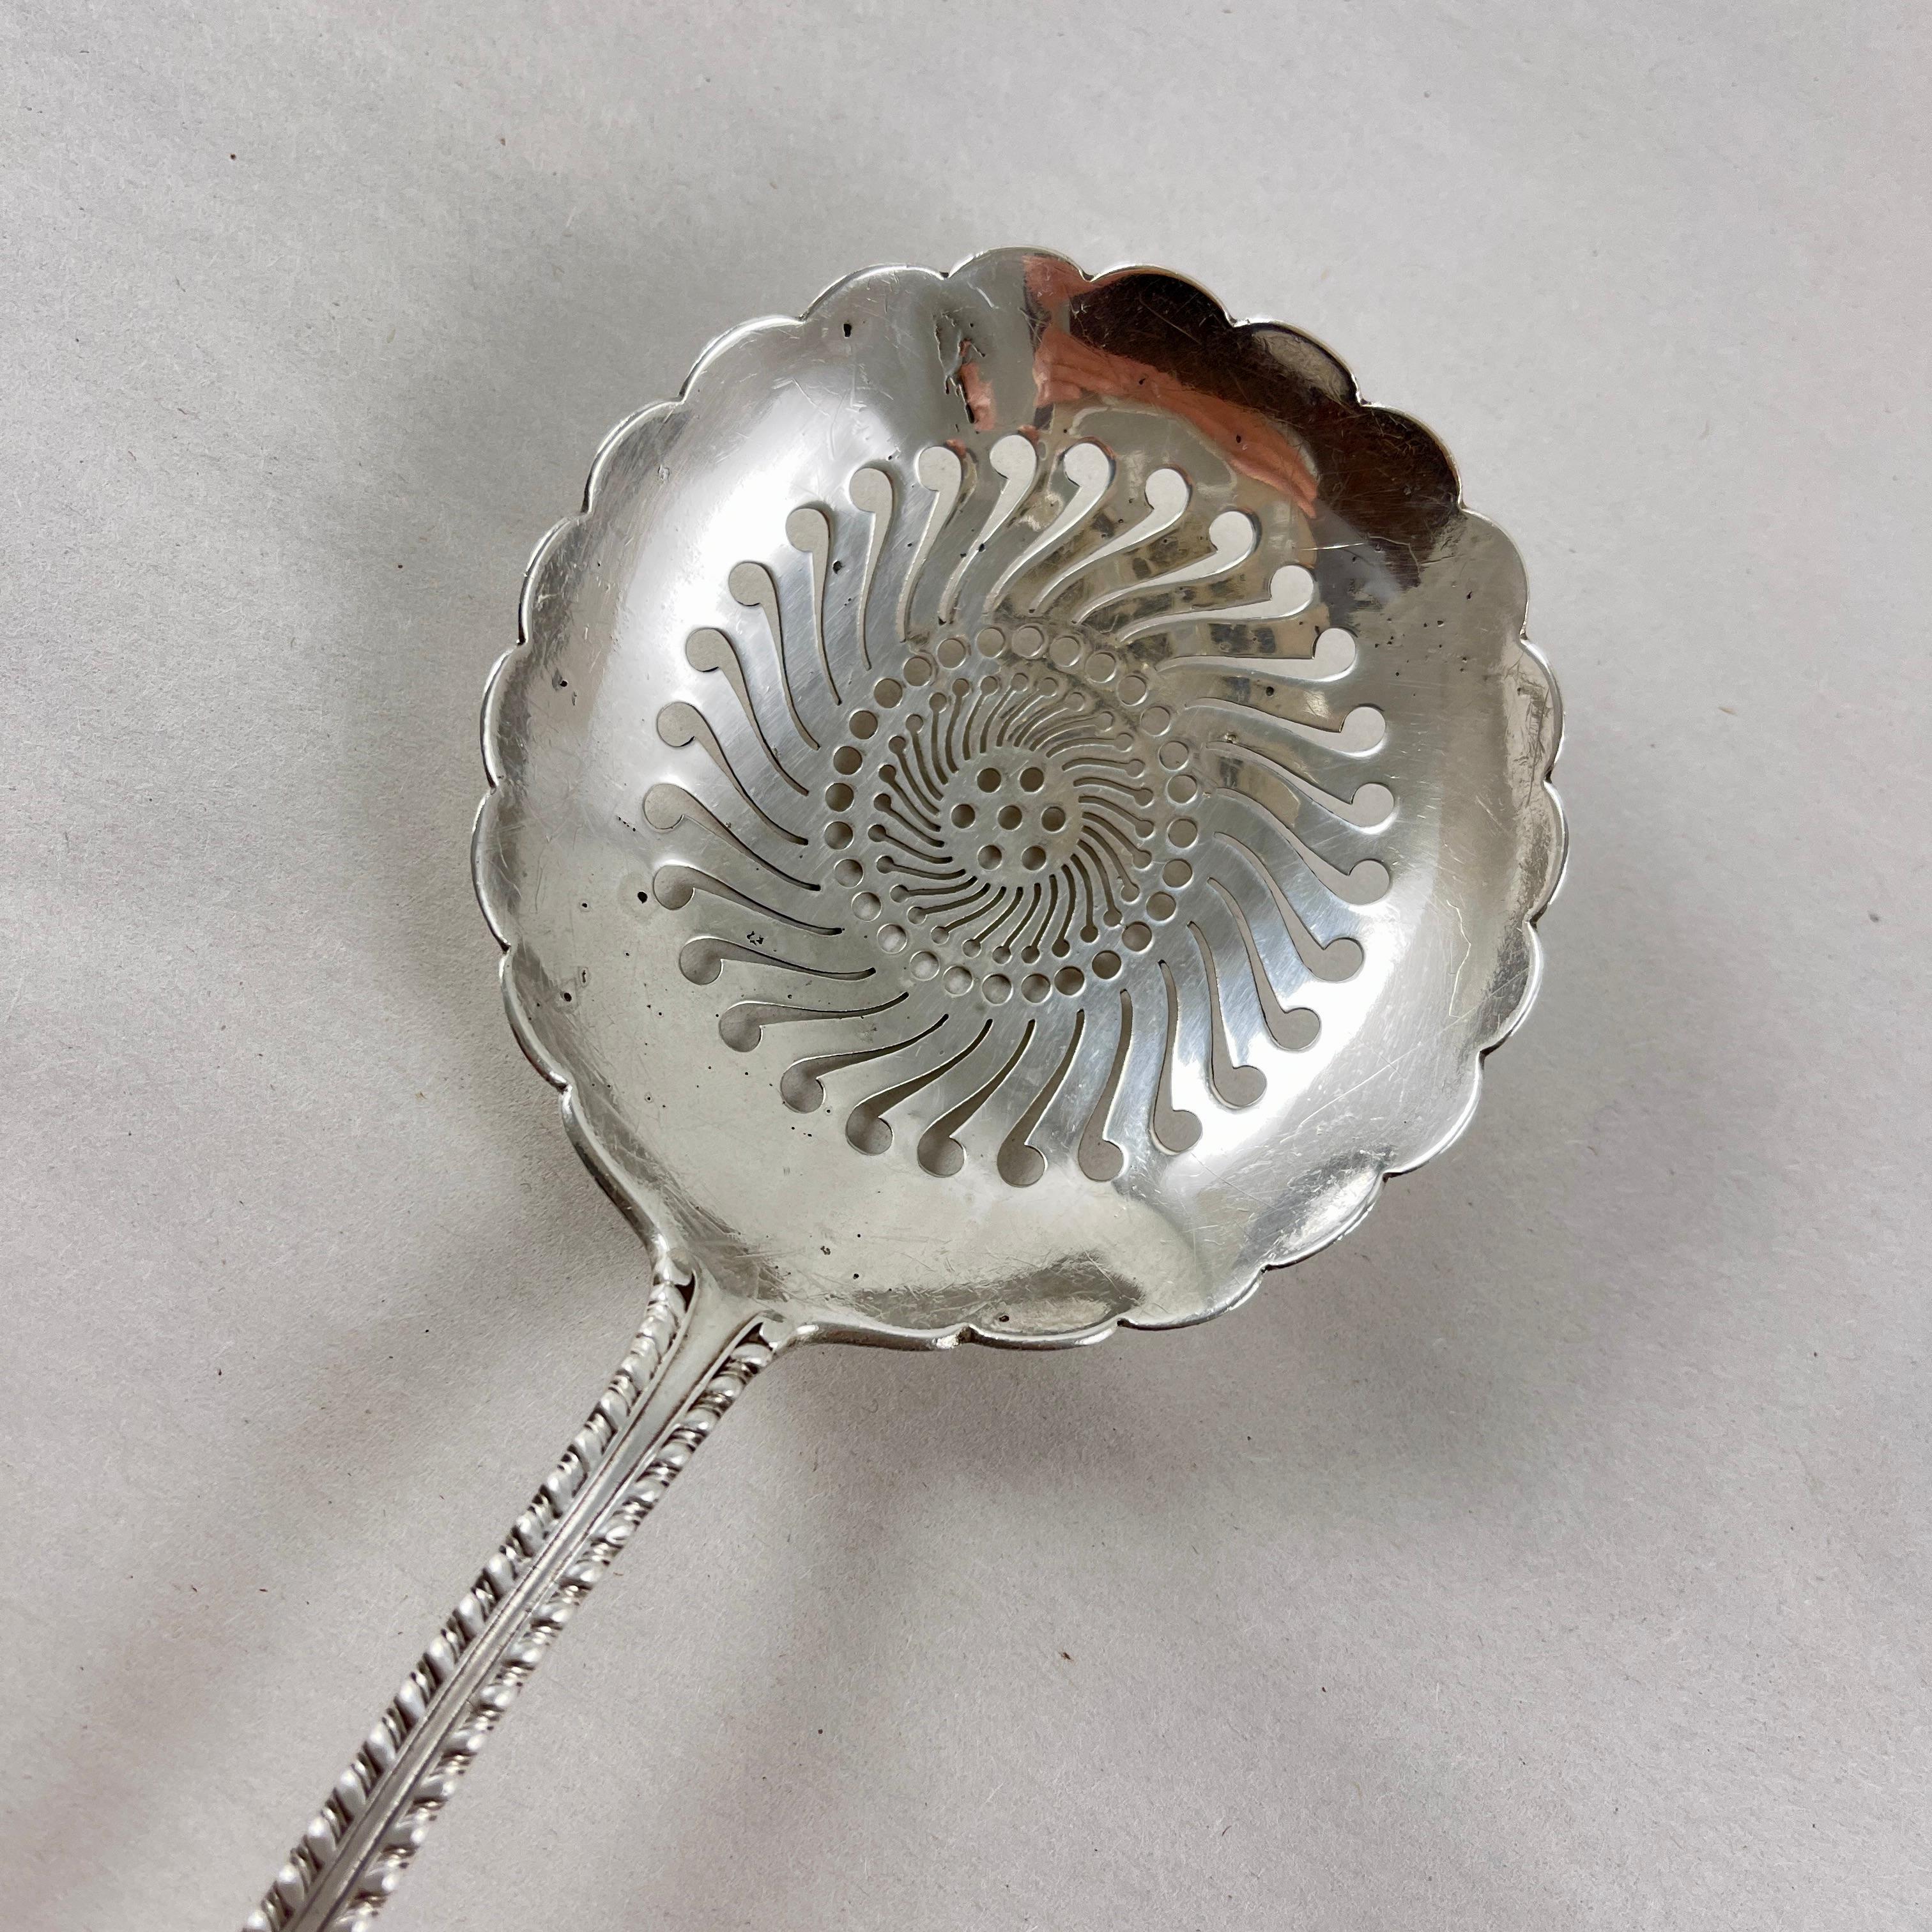 19th Century Dominick & Haff Estate Sterling Silver Hand Made Slotted Spoon, 1892 For Sale